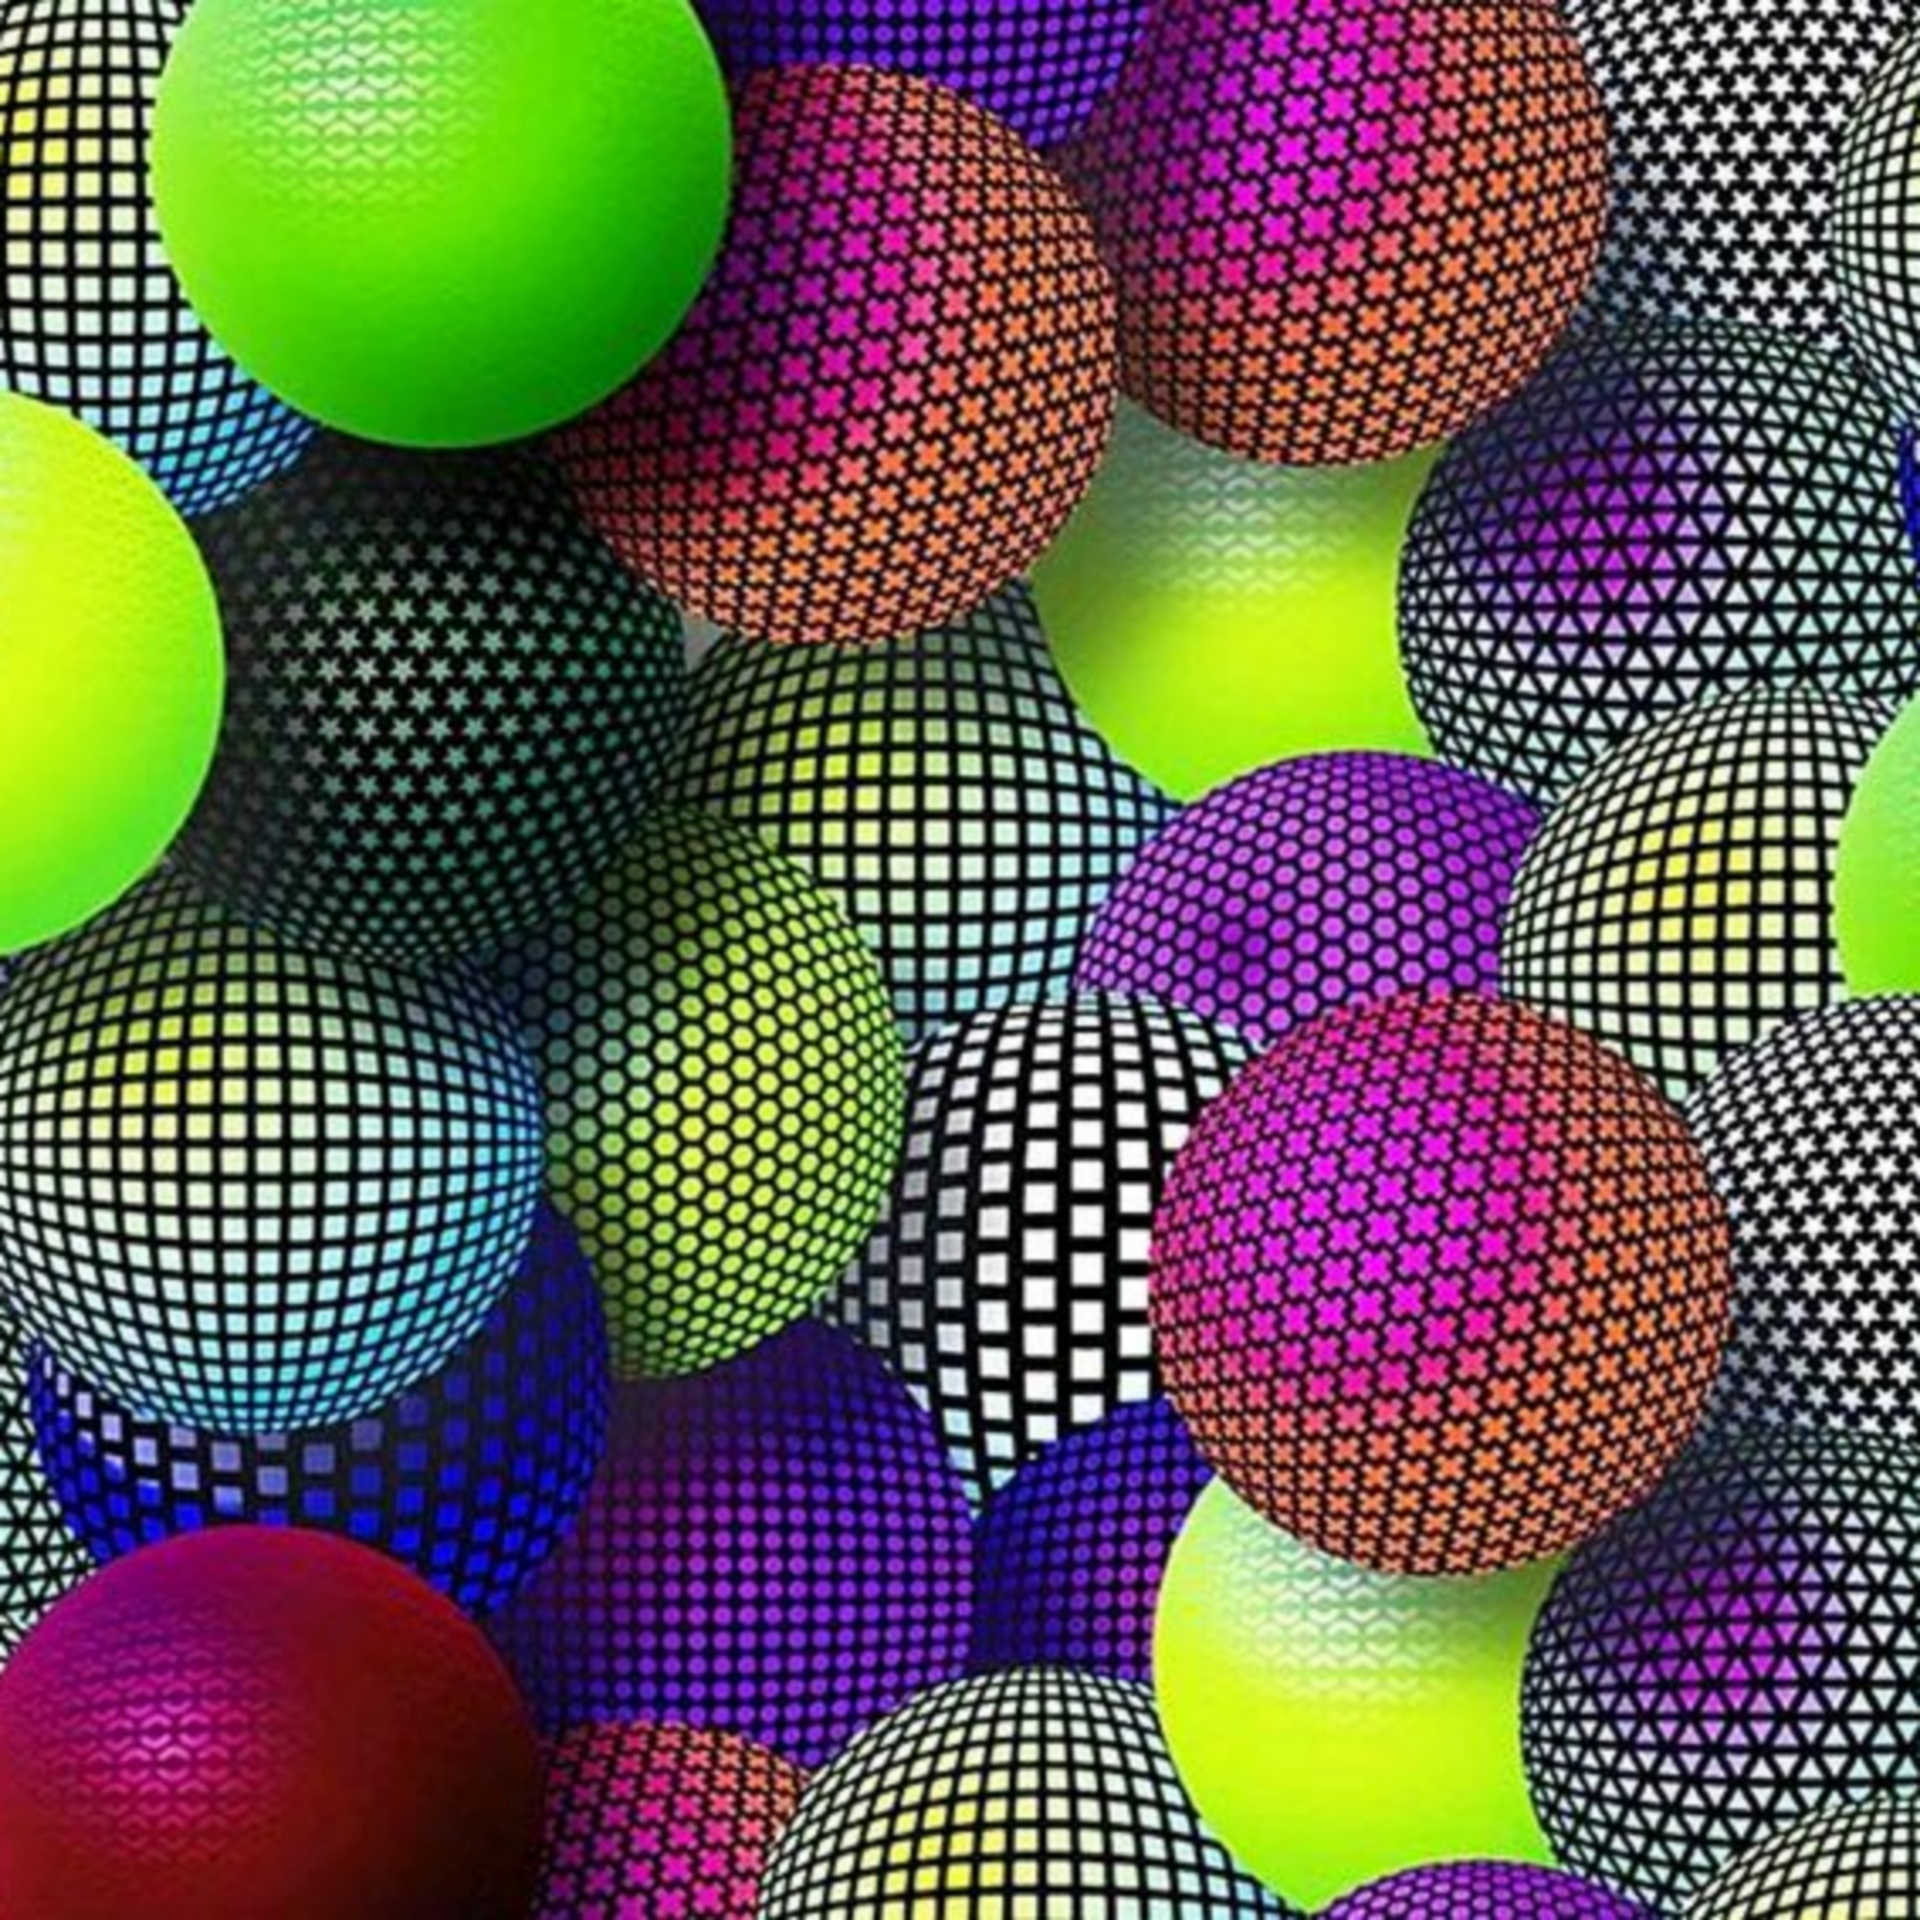 Free download Colorballspatternwallpaperbackground free image from ...